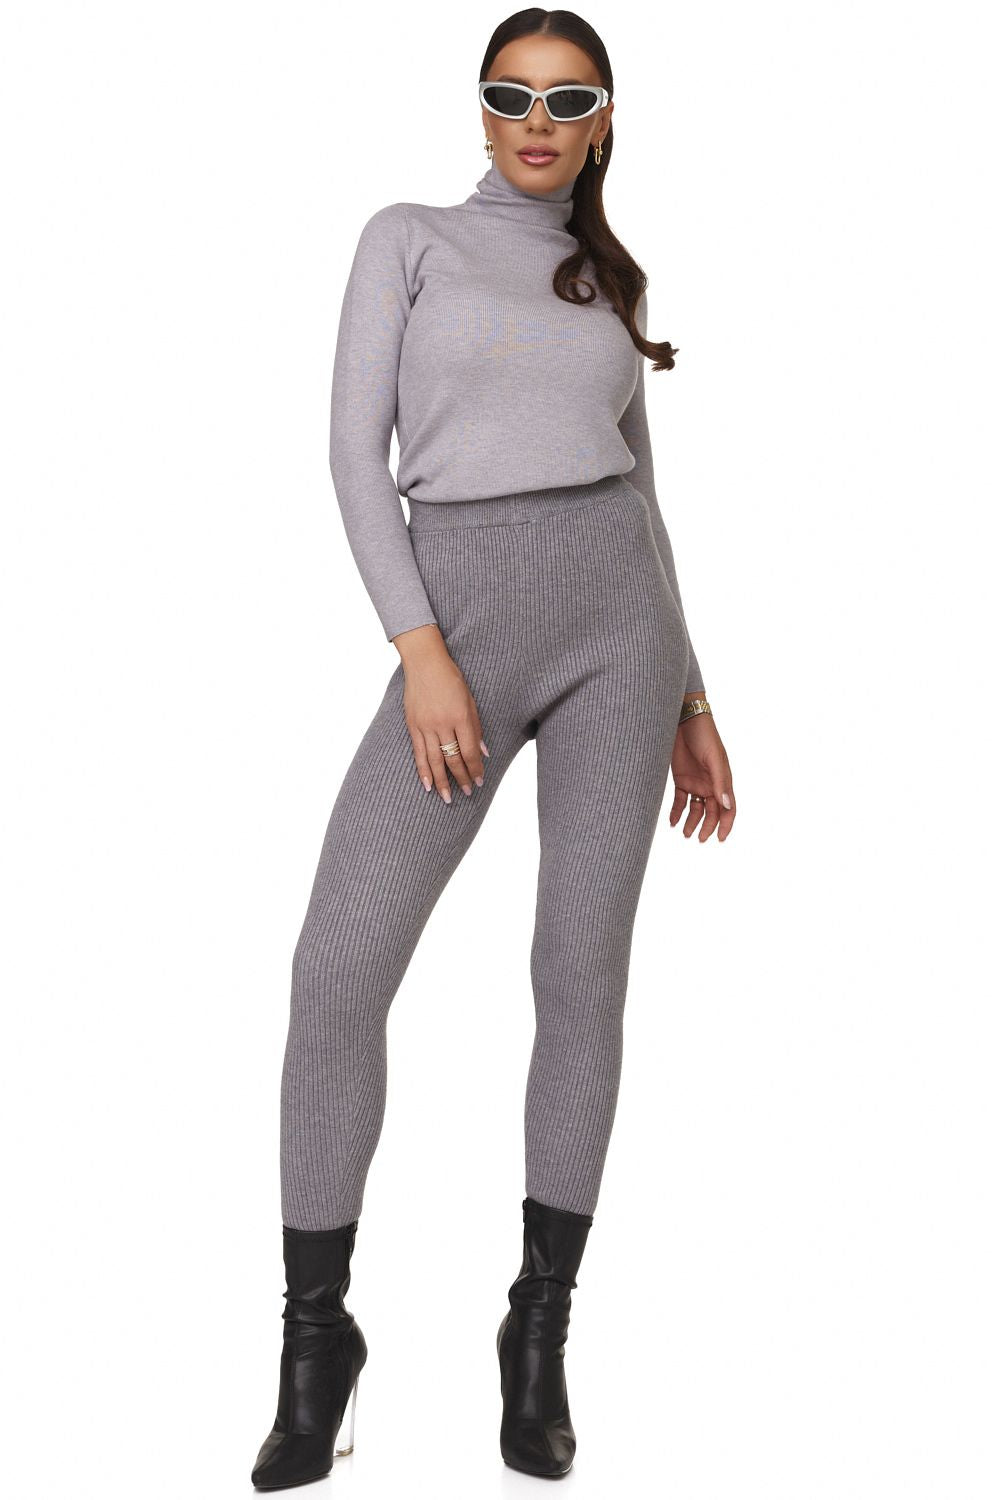 Wamia Bogas grey casual women's tights